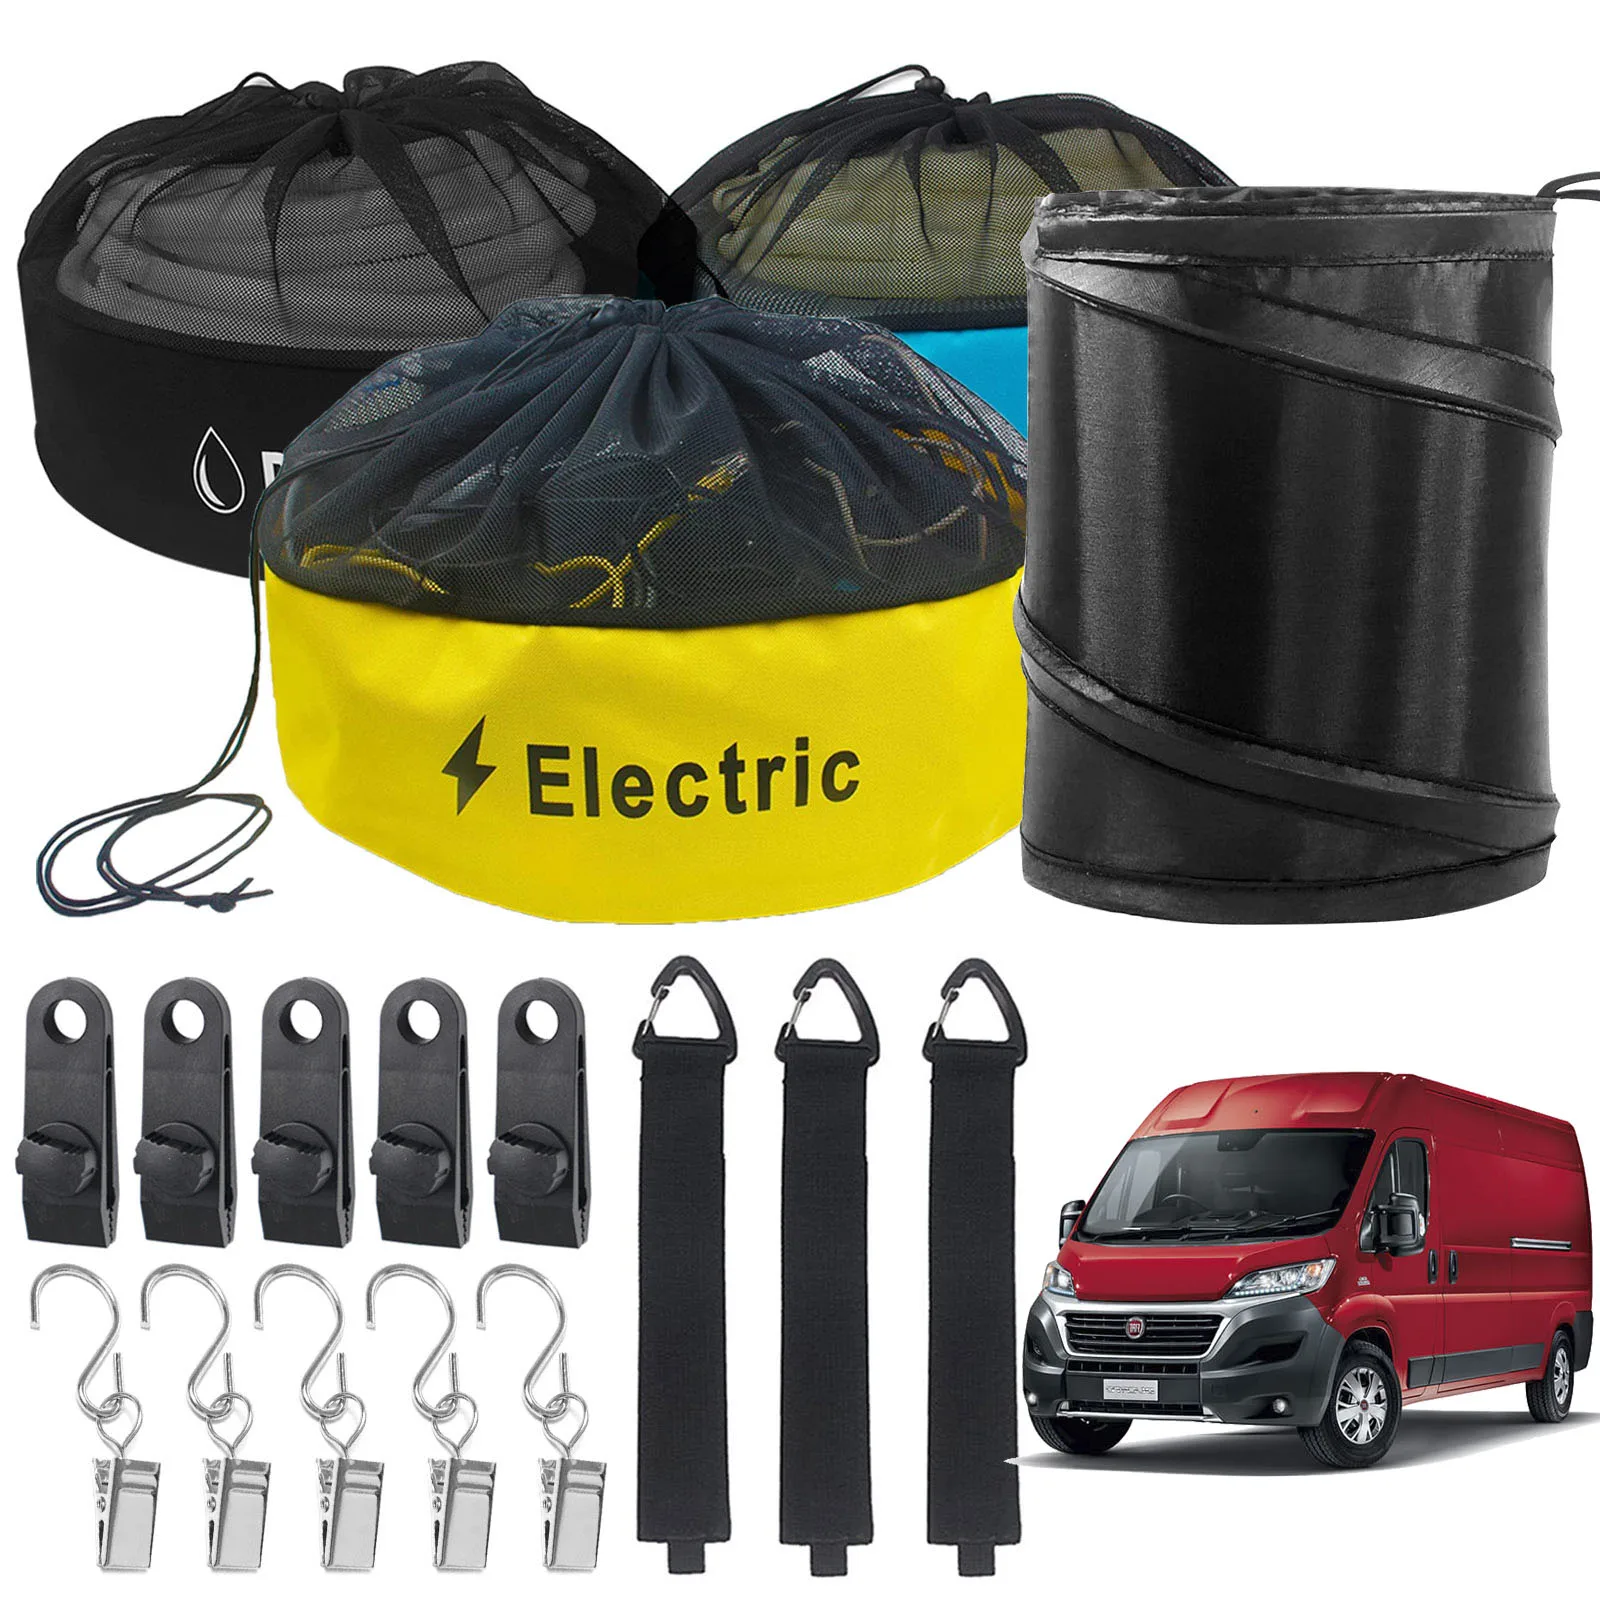 RV Hose Bags for Fiat Ducato 244 250 290 Camper Storage Sewer Fresh/Black Water Electrical Trash Can Motorhome Cleaning Tool Kit каркасные автошторки fiat ducato 2 250 кузов 2006 н в форточки клипсы leg9067